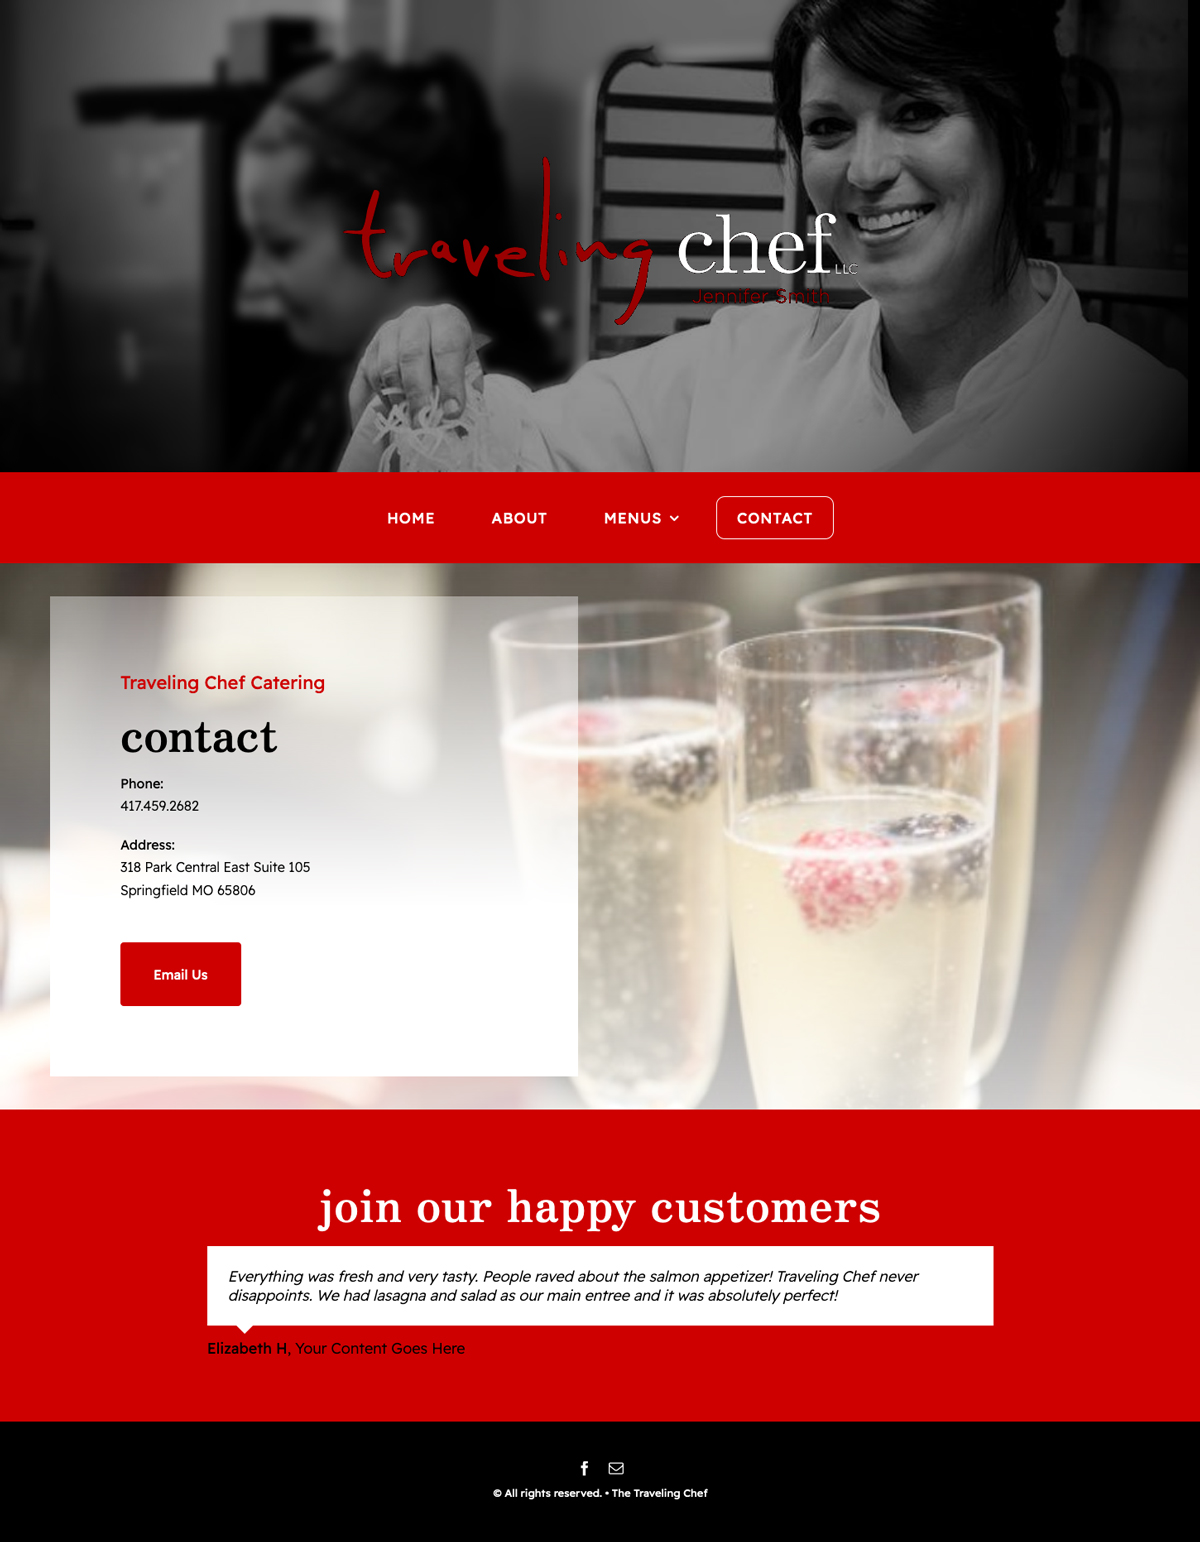 Website Design for The Traveling Chef Catering and Personal Chef - Contact